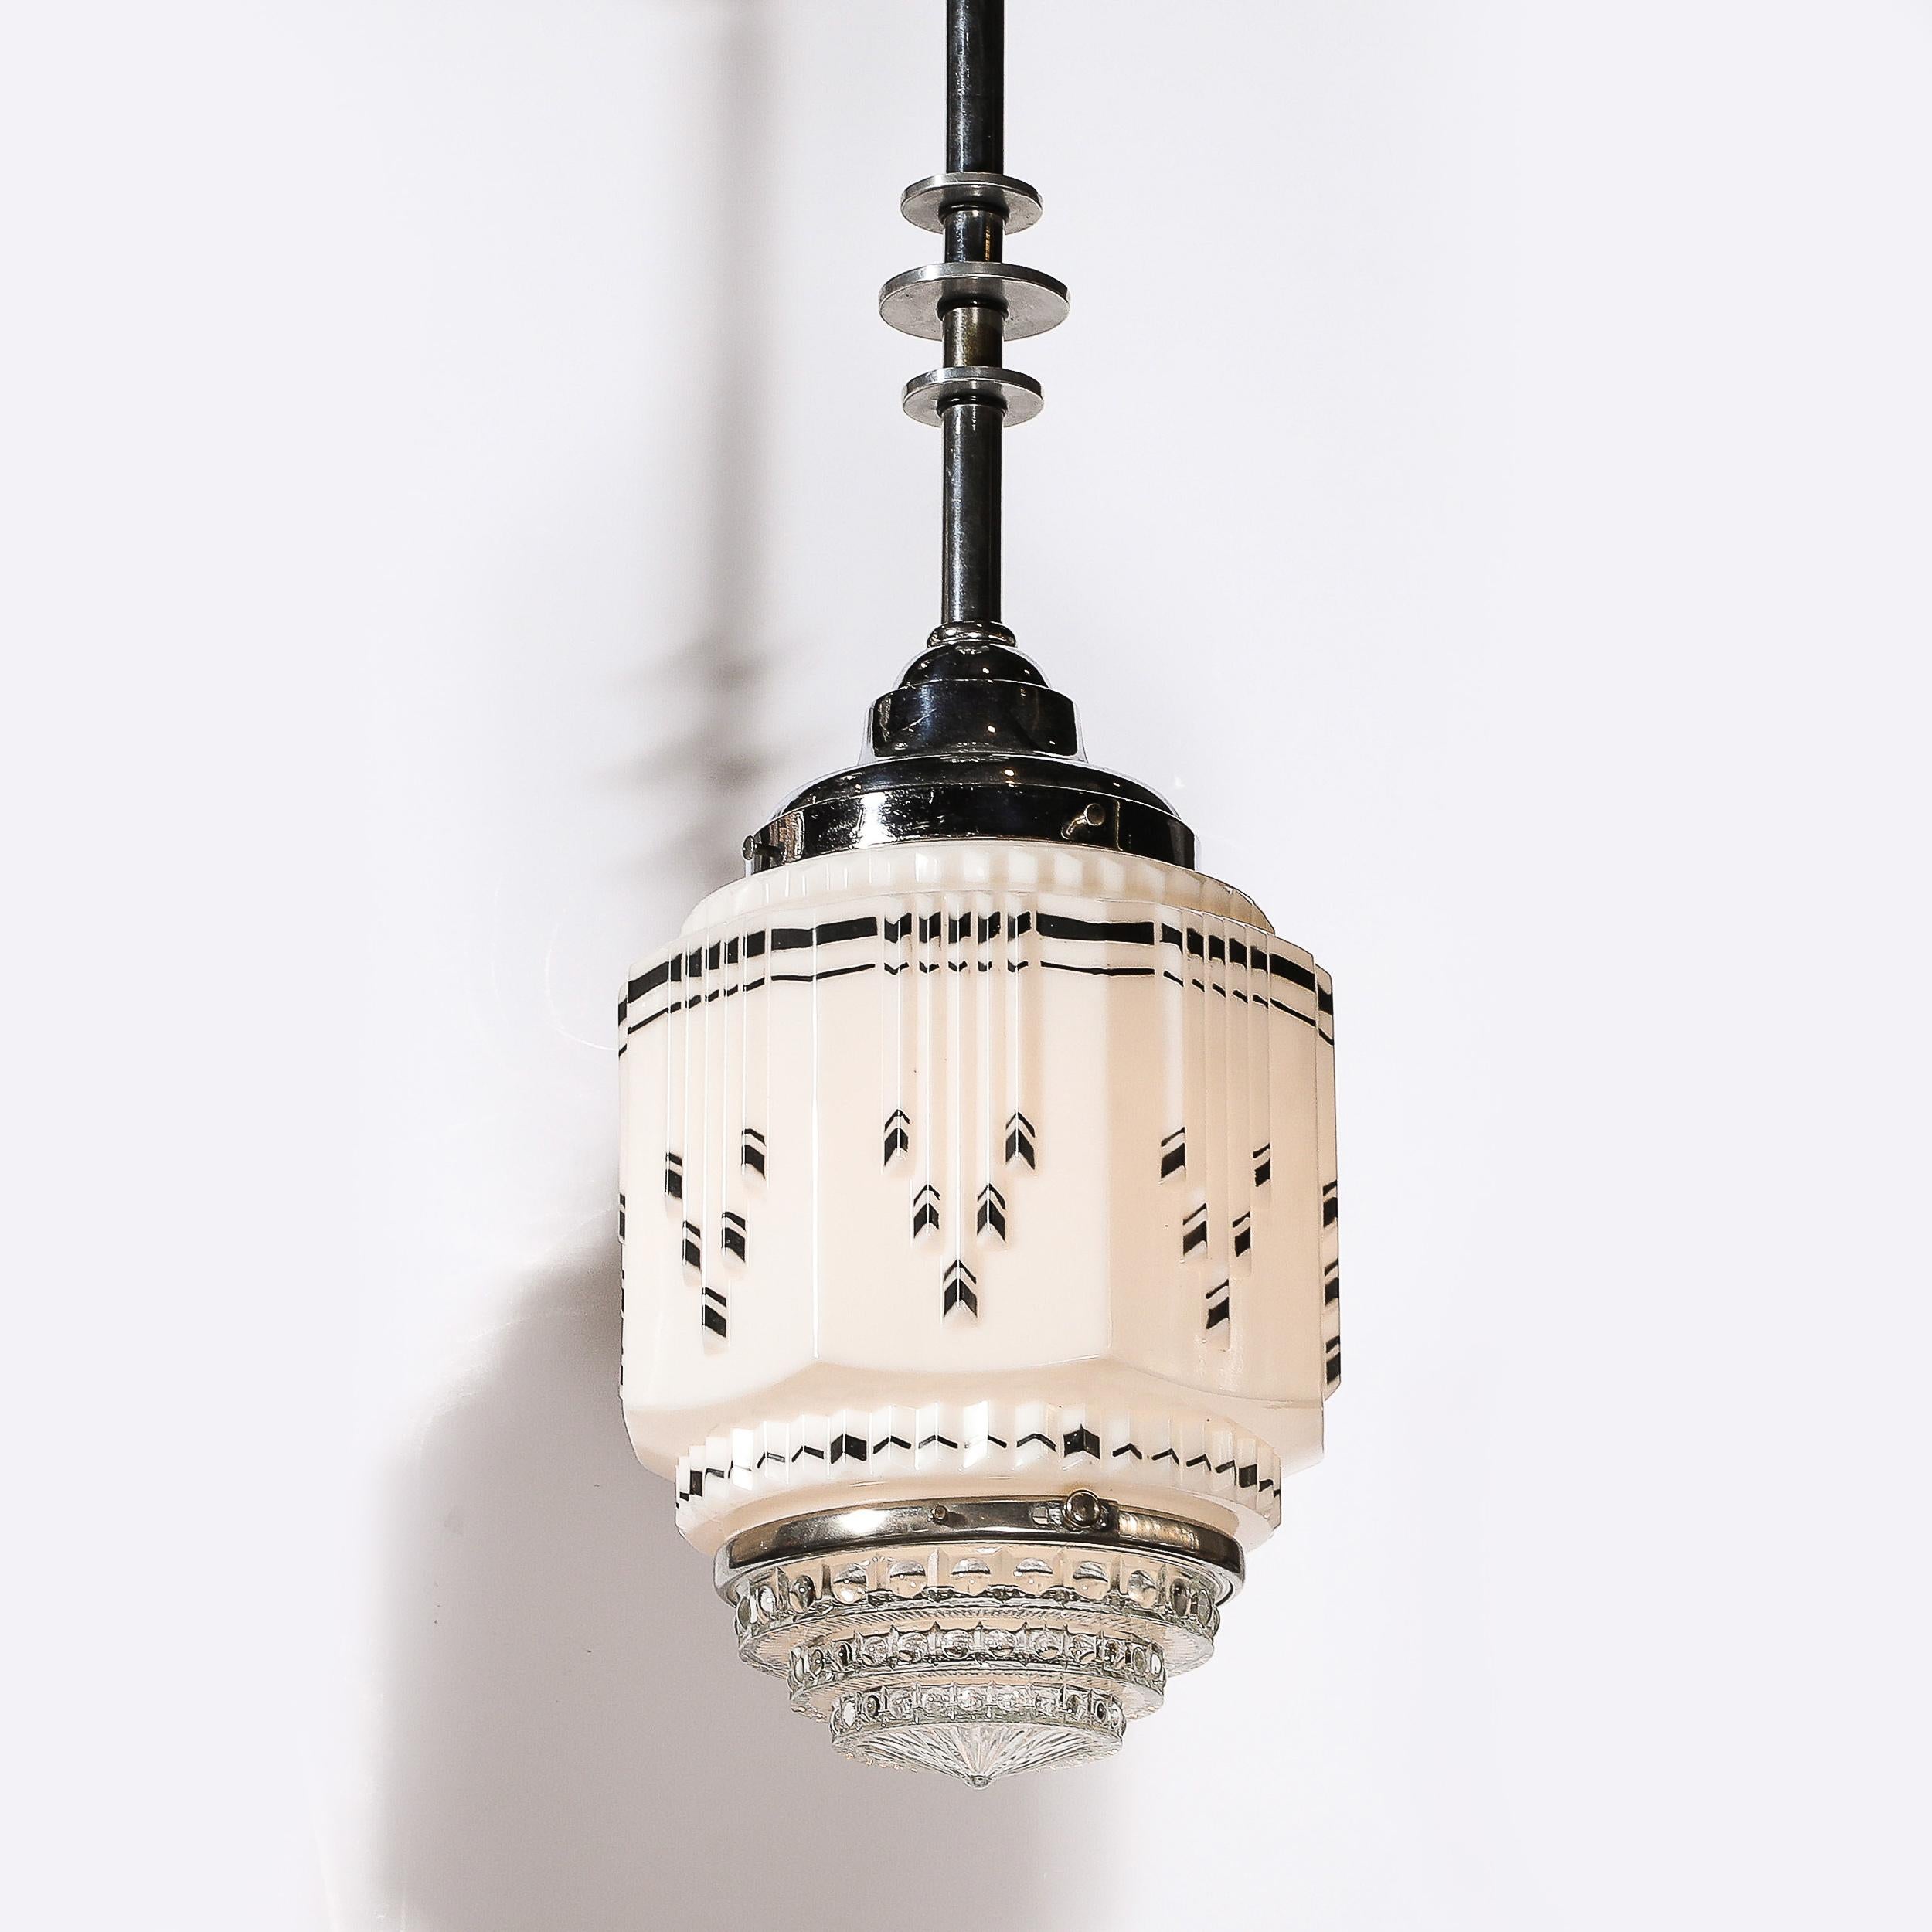 This beautiful and materially exquisite Art Deco Skyscraper Style Milk Glass Pendant Chandelier with Black Enameled Detailing & Chrome Fittings originates from the United States, Circa 1935. It features a timeless geometric composition formed of